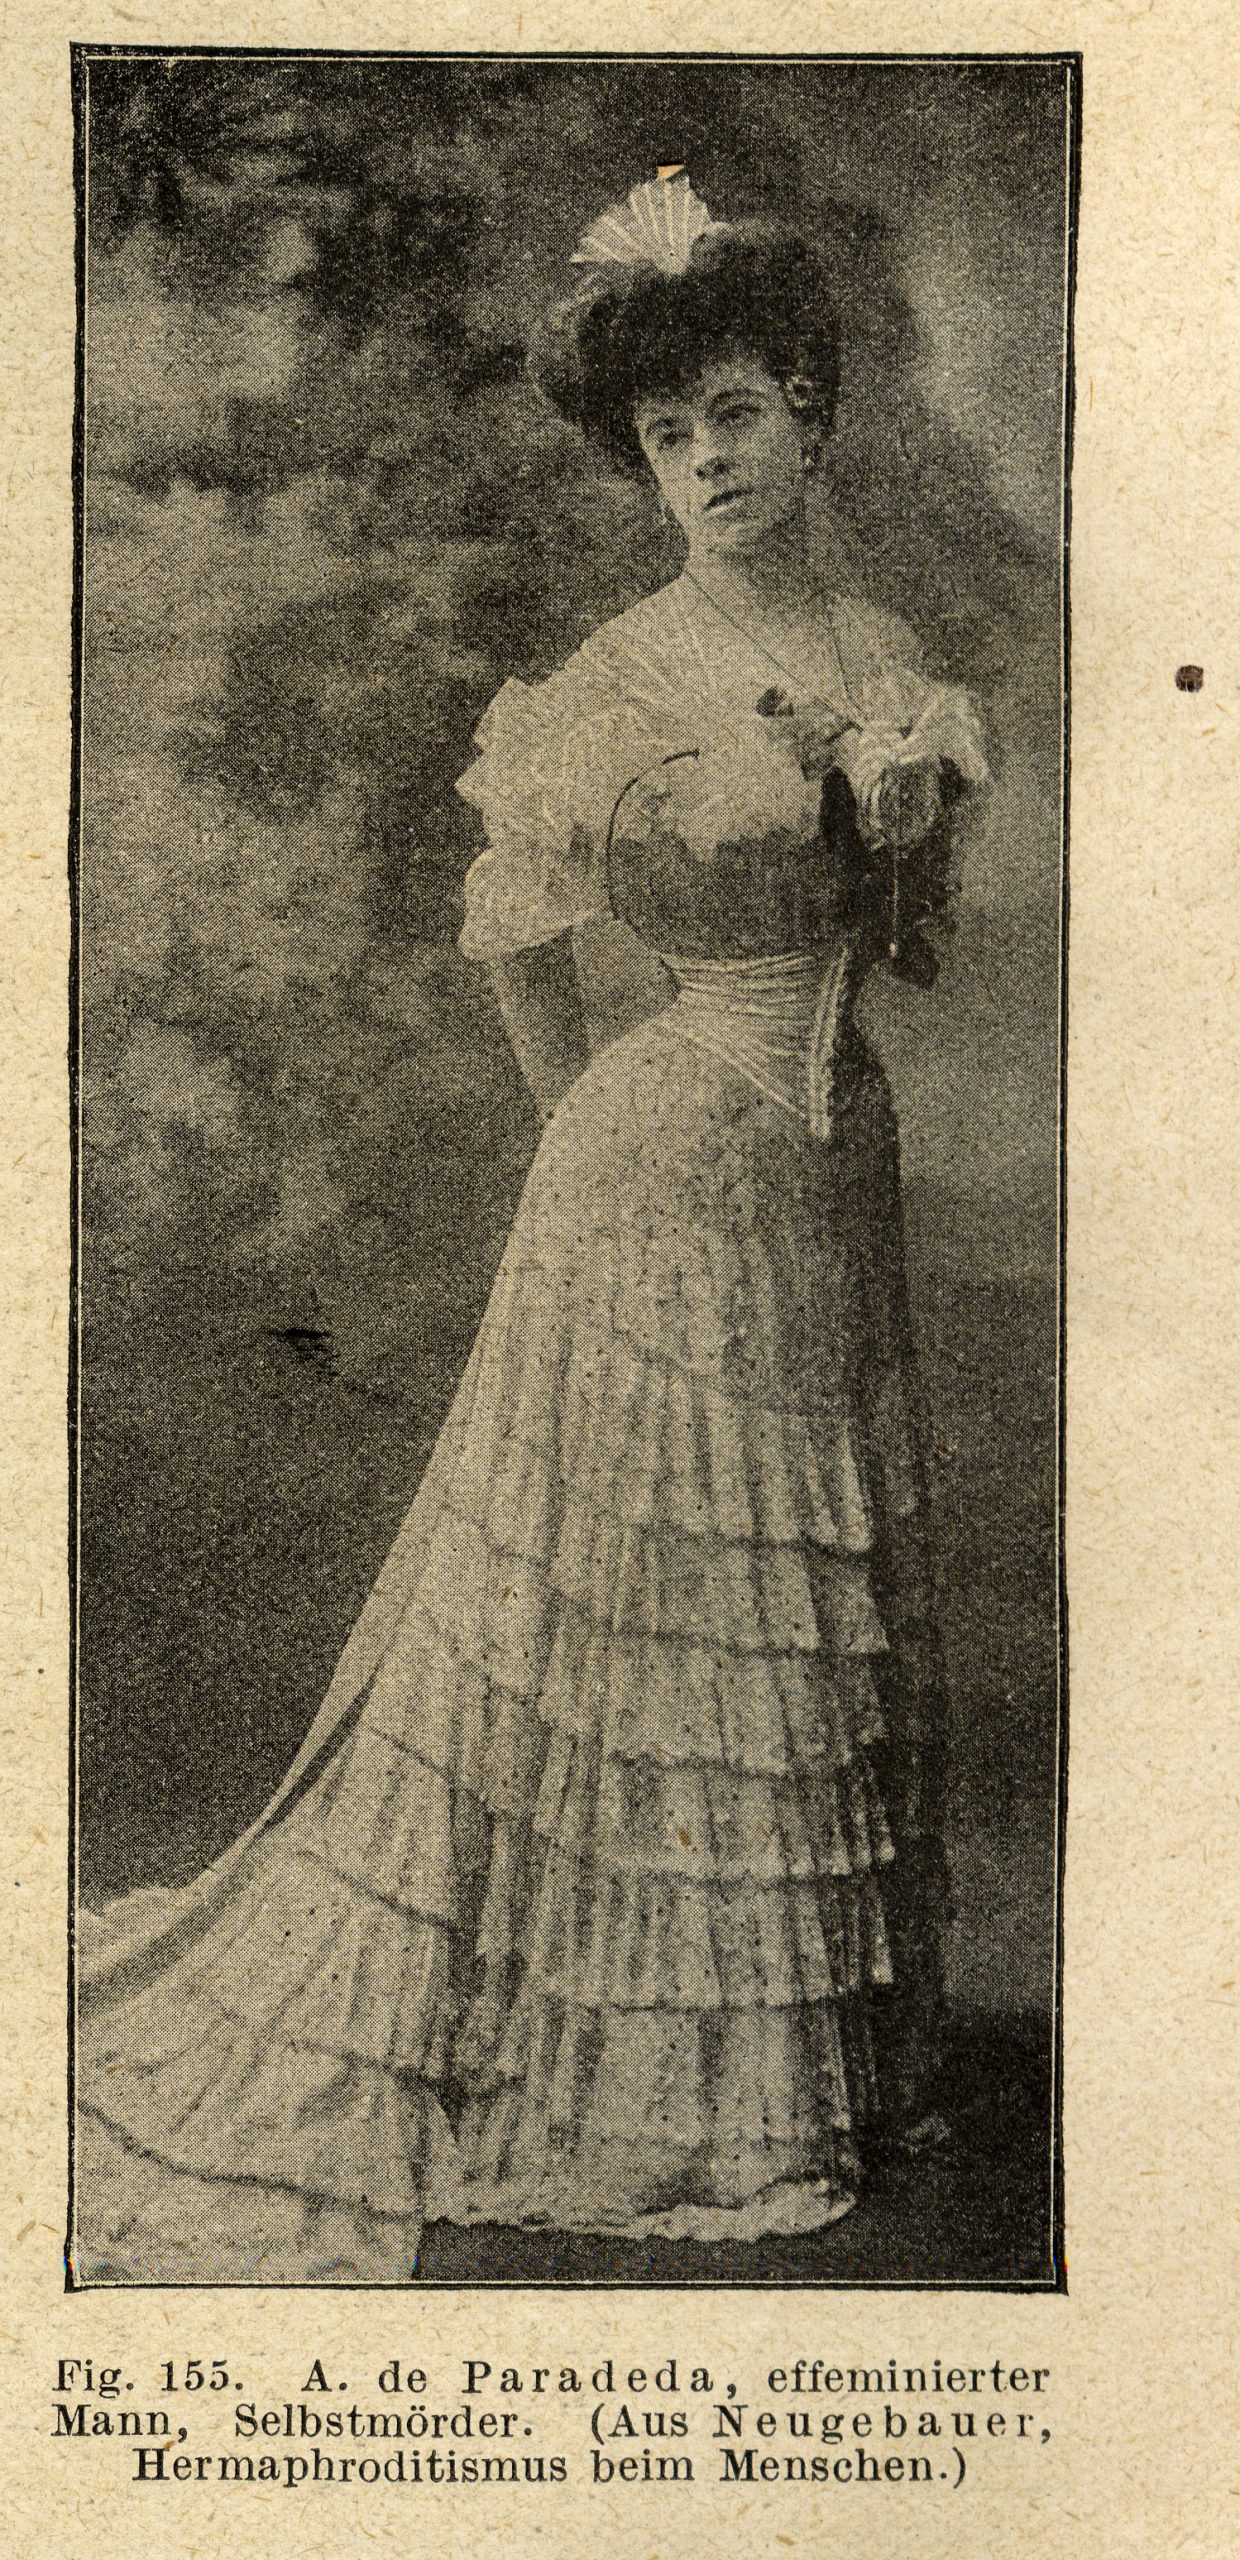 Old photograph of a woman in a dress.